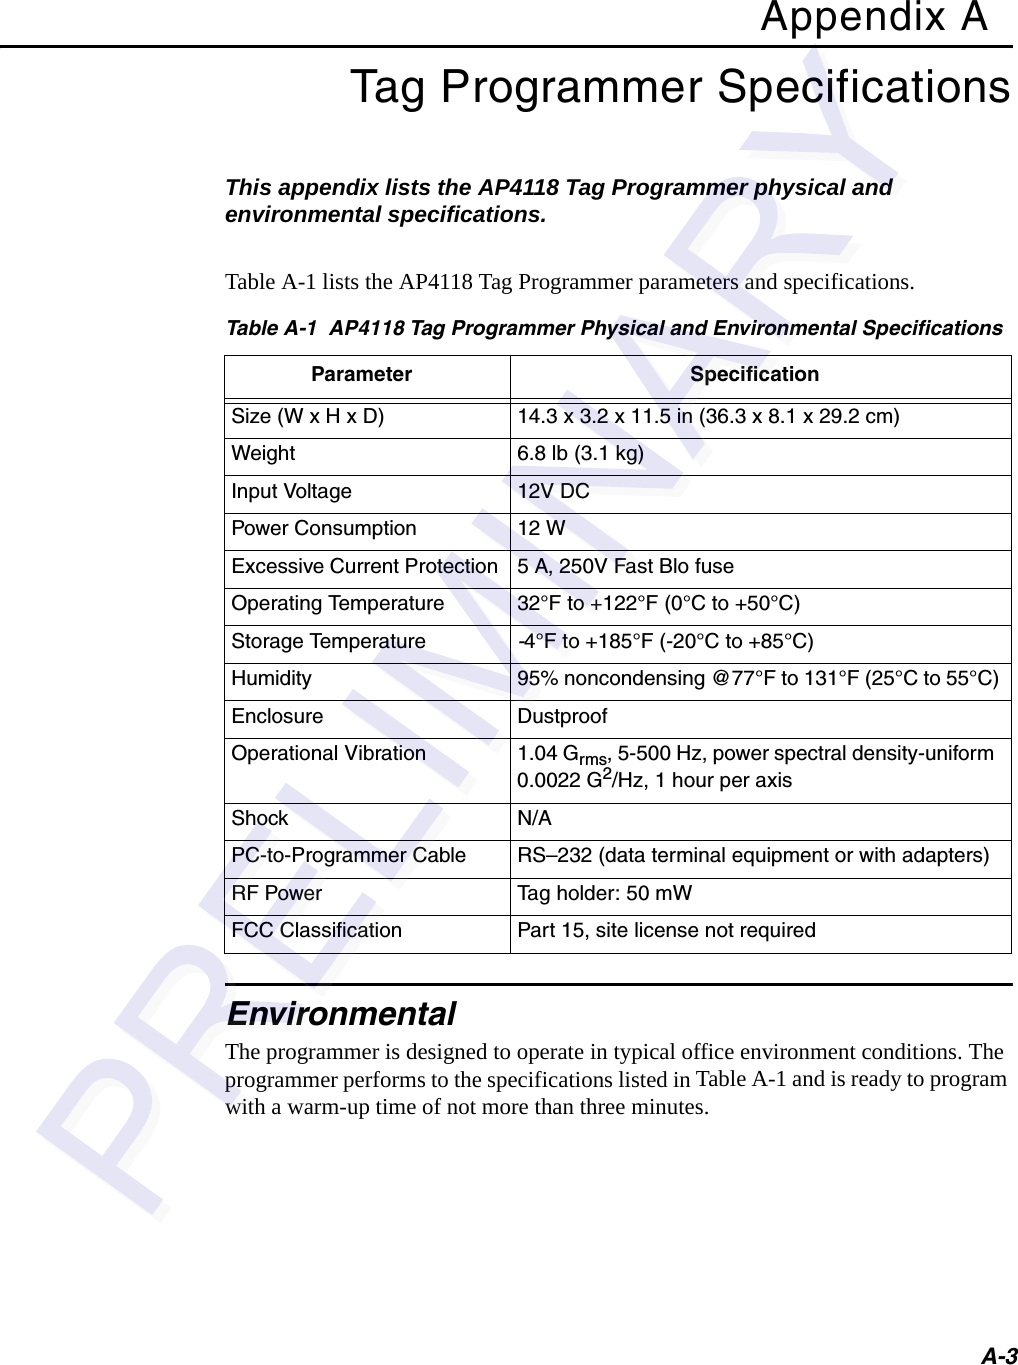 A-3Appendix ATag Programmer SpecificationsThis appendix lists the AP4118 Tag Programmer physical and environmental specifications.Table A-1 lists the AP4118 Tag Programmer parameters and specifications.EnvironmentalThe programmer is designed to operate in typical office environment conditions. The programmer performs to the specifications listed in Table A-1 and is ready to program with a warm-up time of not more than three minutes.Table A-1  AP4118 Tag Programmer Physical and Environmental SpecificationsParameter SpecificationSize (W x H x D) 14.3 x 3.2 x 11.5 in (36.3 x 8.1 x 29.2 cm)Weight 6.8 lb (3.1 kg)Input Voltage 12V DCPower Consumption 12 WExcessive Current Protection 5 A, 250V Fast Blo fuseOperating Temperature 32°F to +122°F (0°C to +50°C)Storage Temperature -4°F to +185°F (-20°C to +85°C)Humidity 95% noncondensing @77°F to 131°F (25°C to 55°C)Enclosure DustproofOperational Vibration 1.04 Grms, 5-500 Hz, power spectral density-uniform 0.0022 G2/Hz, 1 hour per axisShock N/APC-to-Programmer Cable RS–232 (data terminal equipment or with adapters)RF Power Tag holder: 50 mWFCC Classification Part 15, site license not required